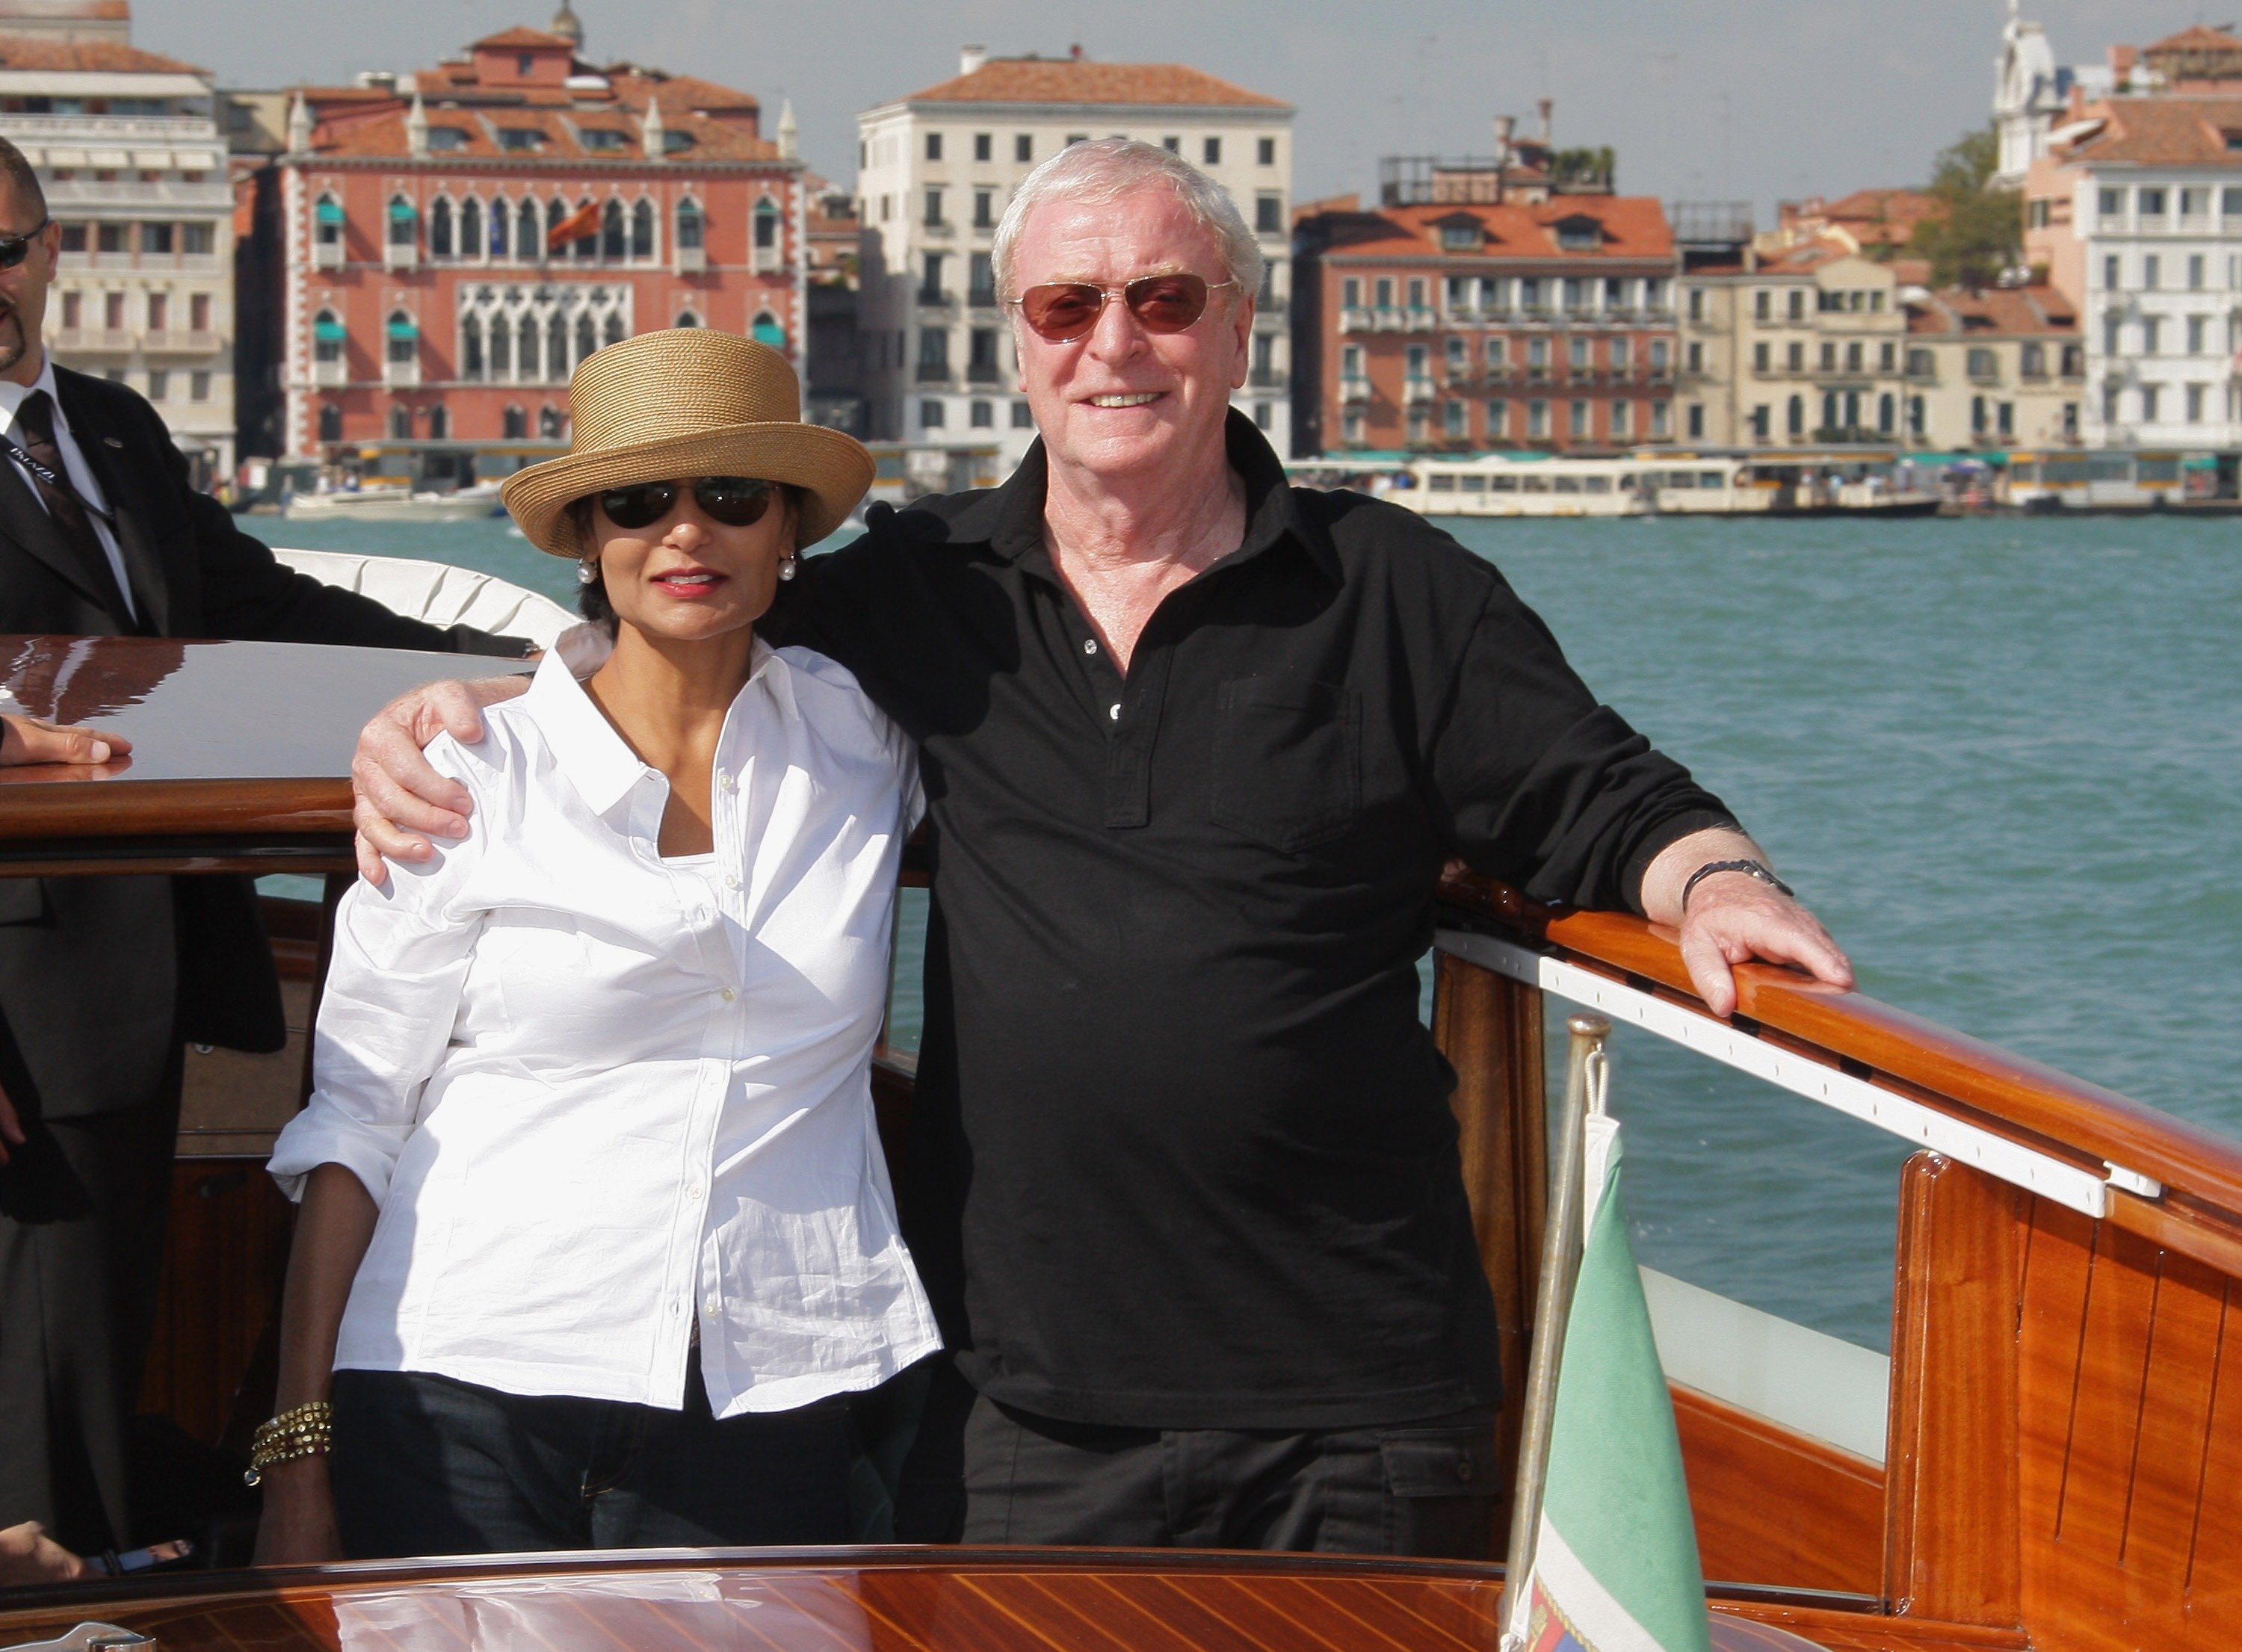 Michael Caine and wife Shakira are seen in Venice during day 4 of the 64th Venice Film Festival on September 1, 2007 | Source: Getty Images